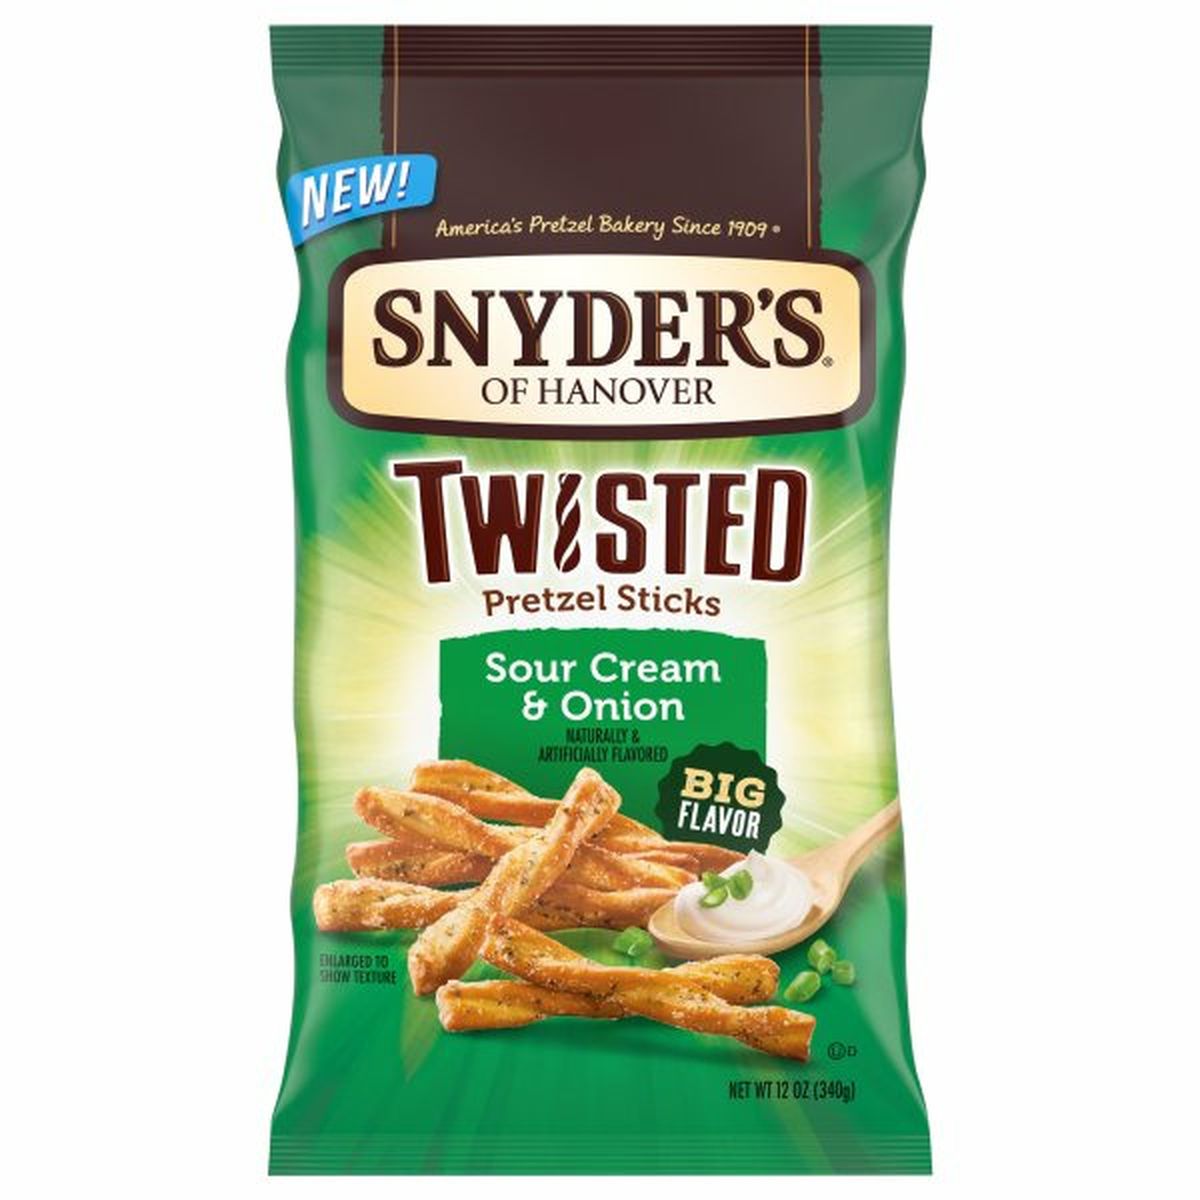 Calories in Snyder's of Hanovers Twisted Pretzel Sticks, Sour Cream & Onion